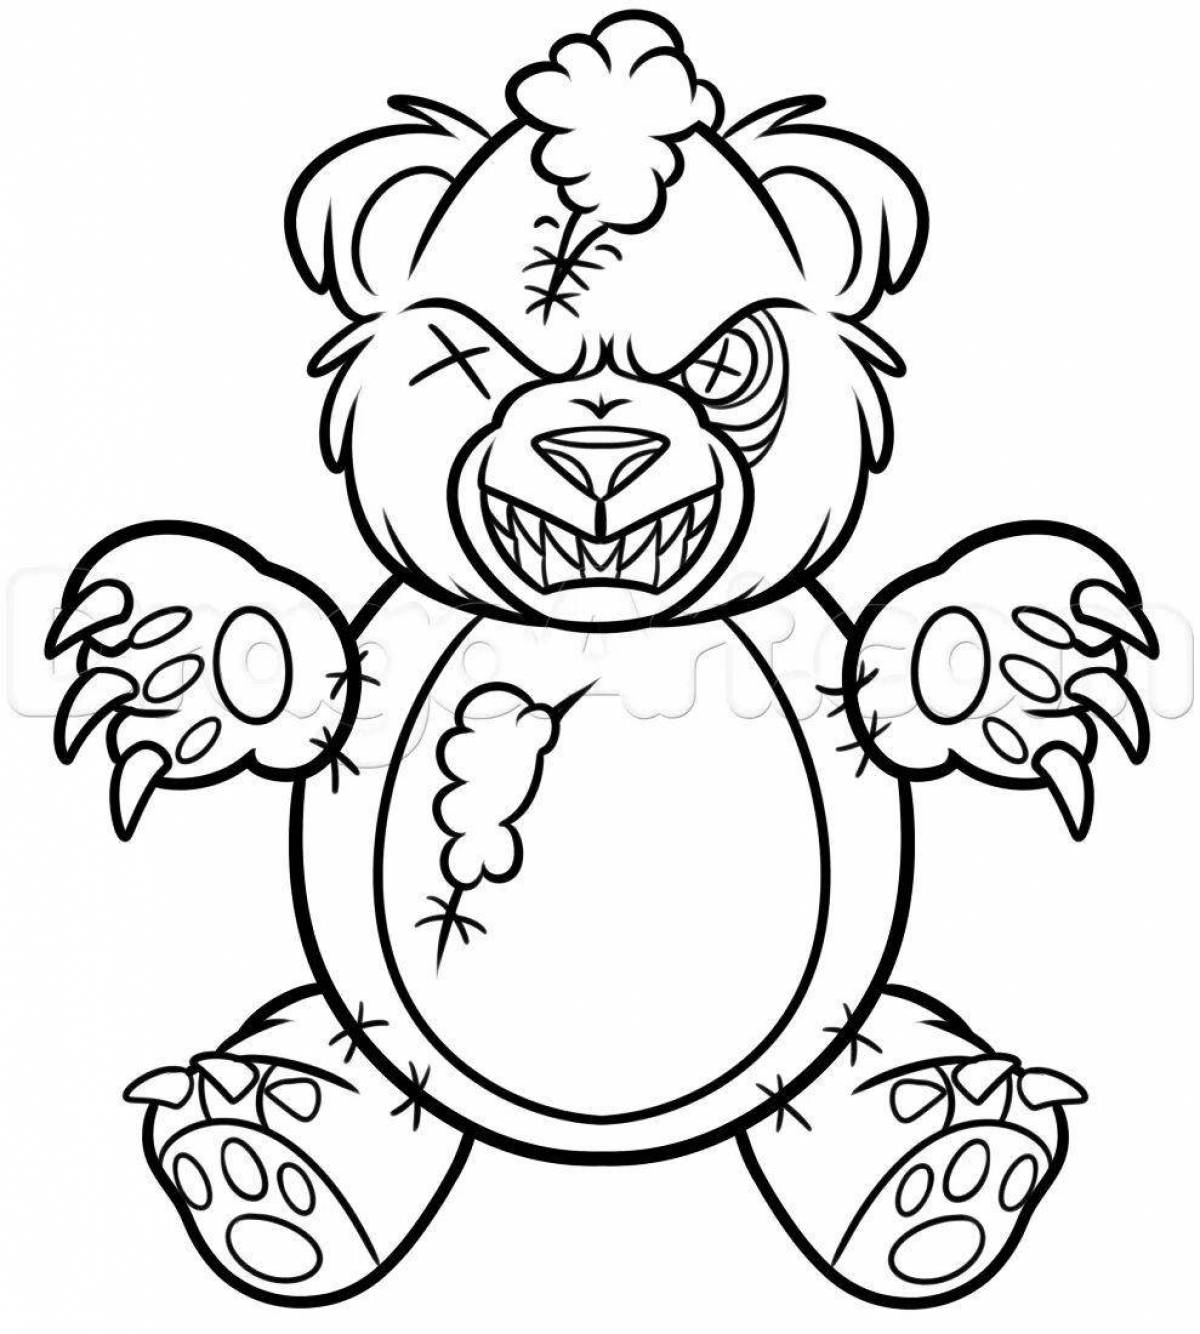 Coloring book offended angry bear